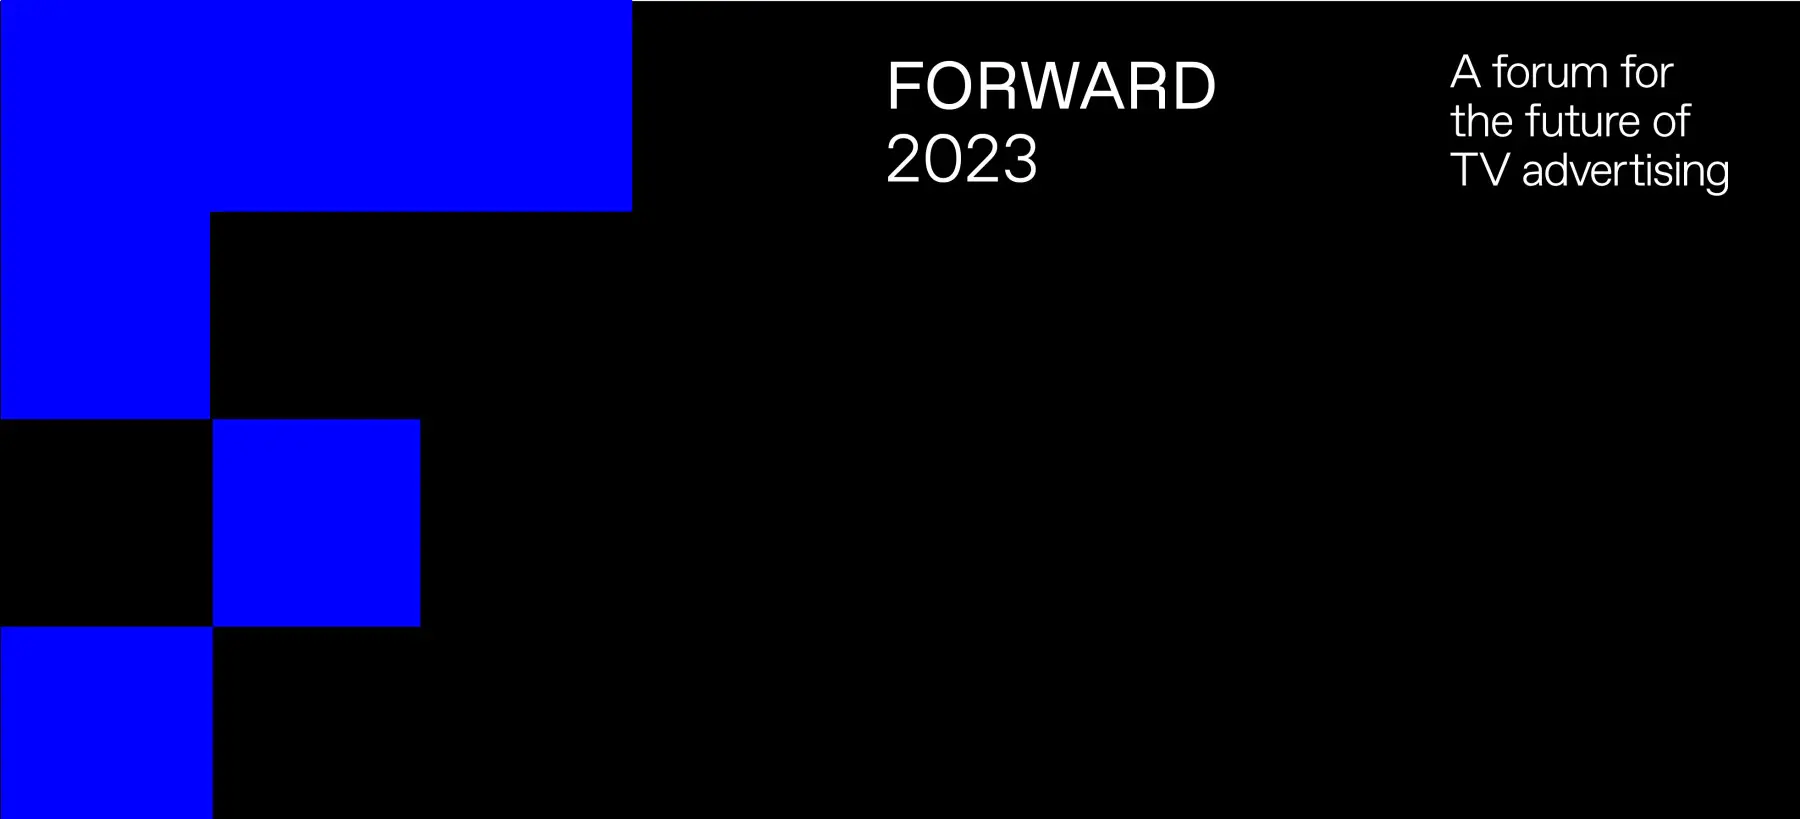 Forward 2023: A Forum for the Future of TV Advertising